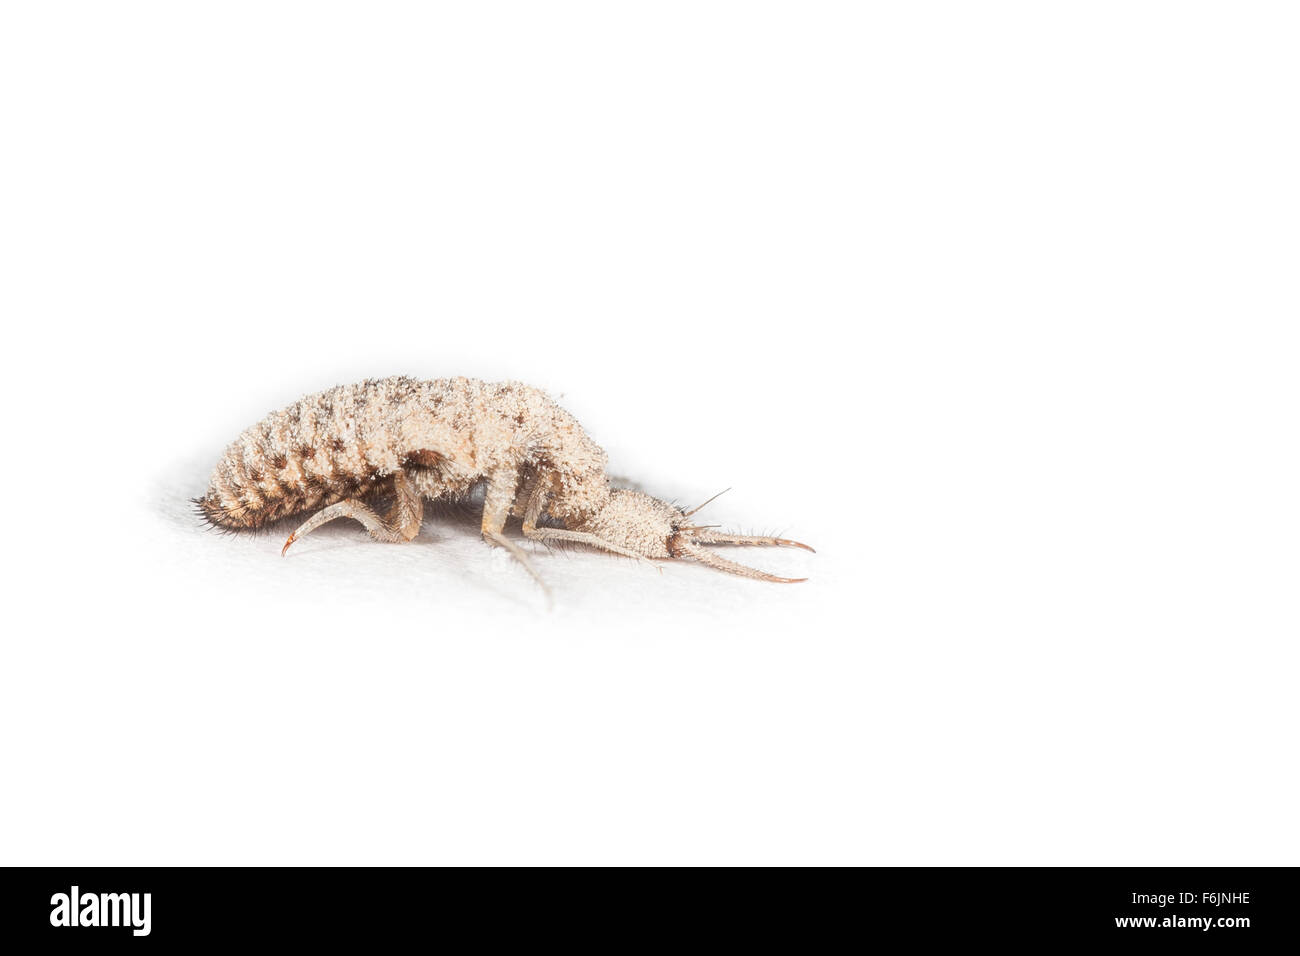 Larval ant lion (doodlebug). These insects burrow into sand and create funnels that trap ants and other insects. Photographed on a white background. Stock Photo